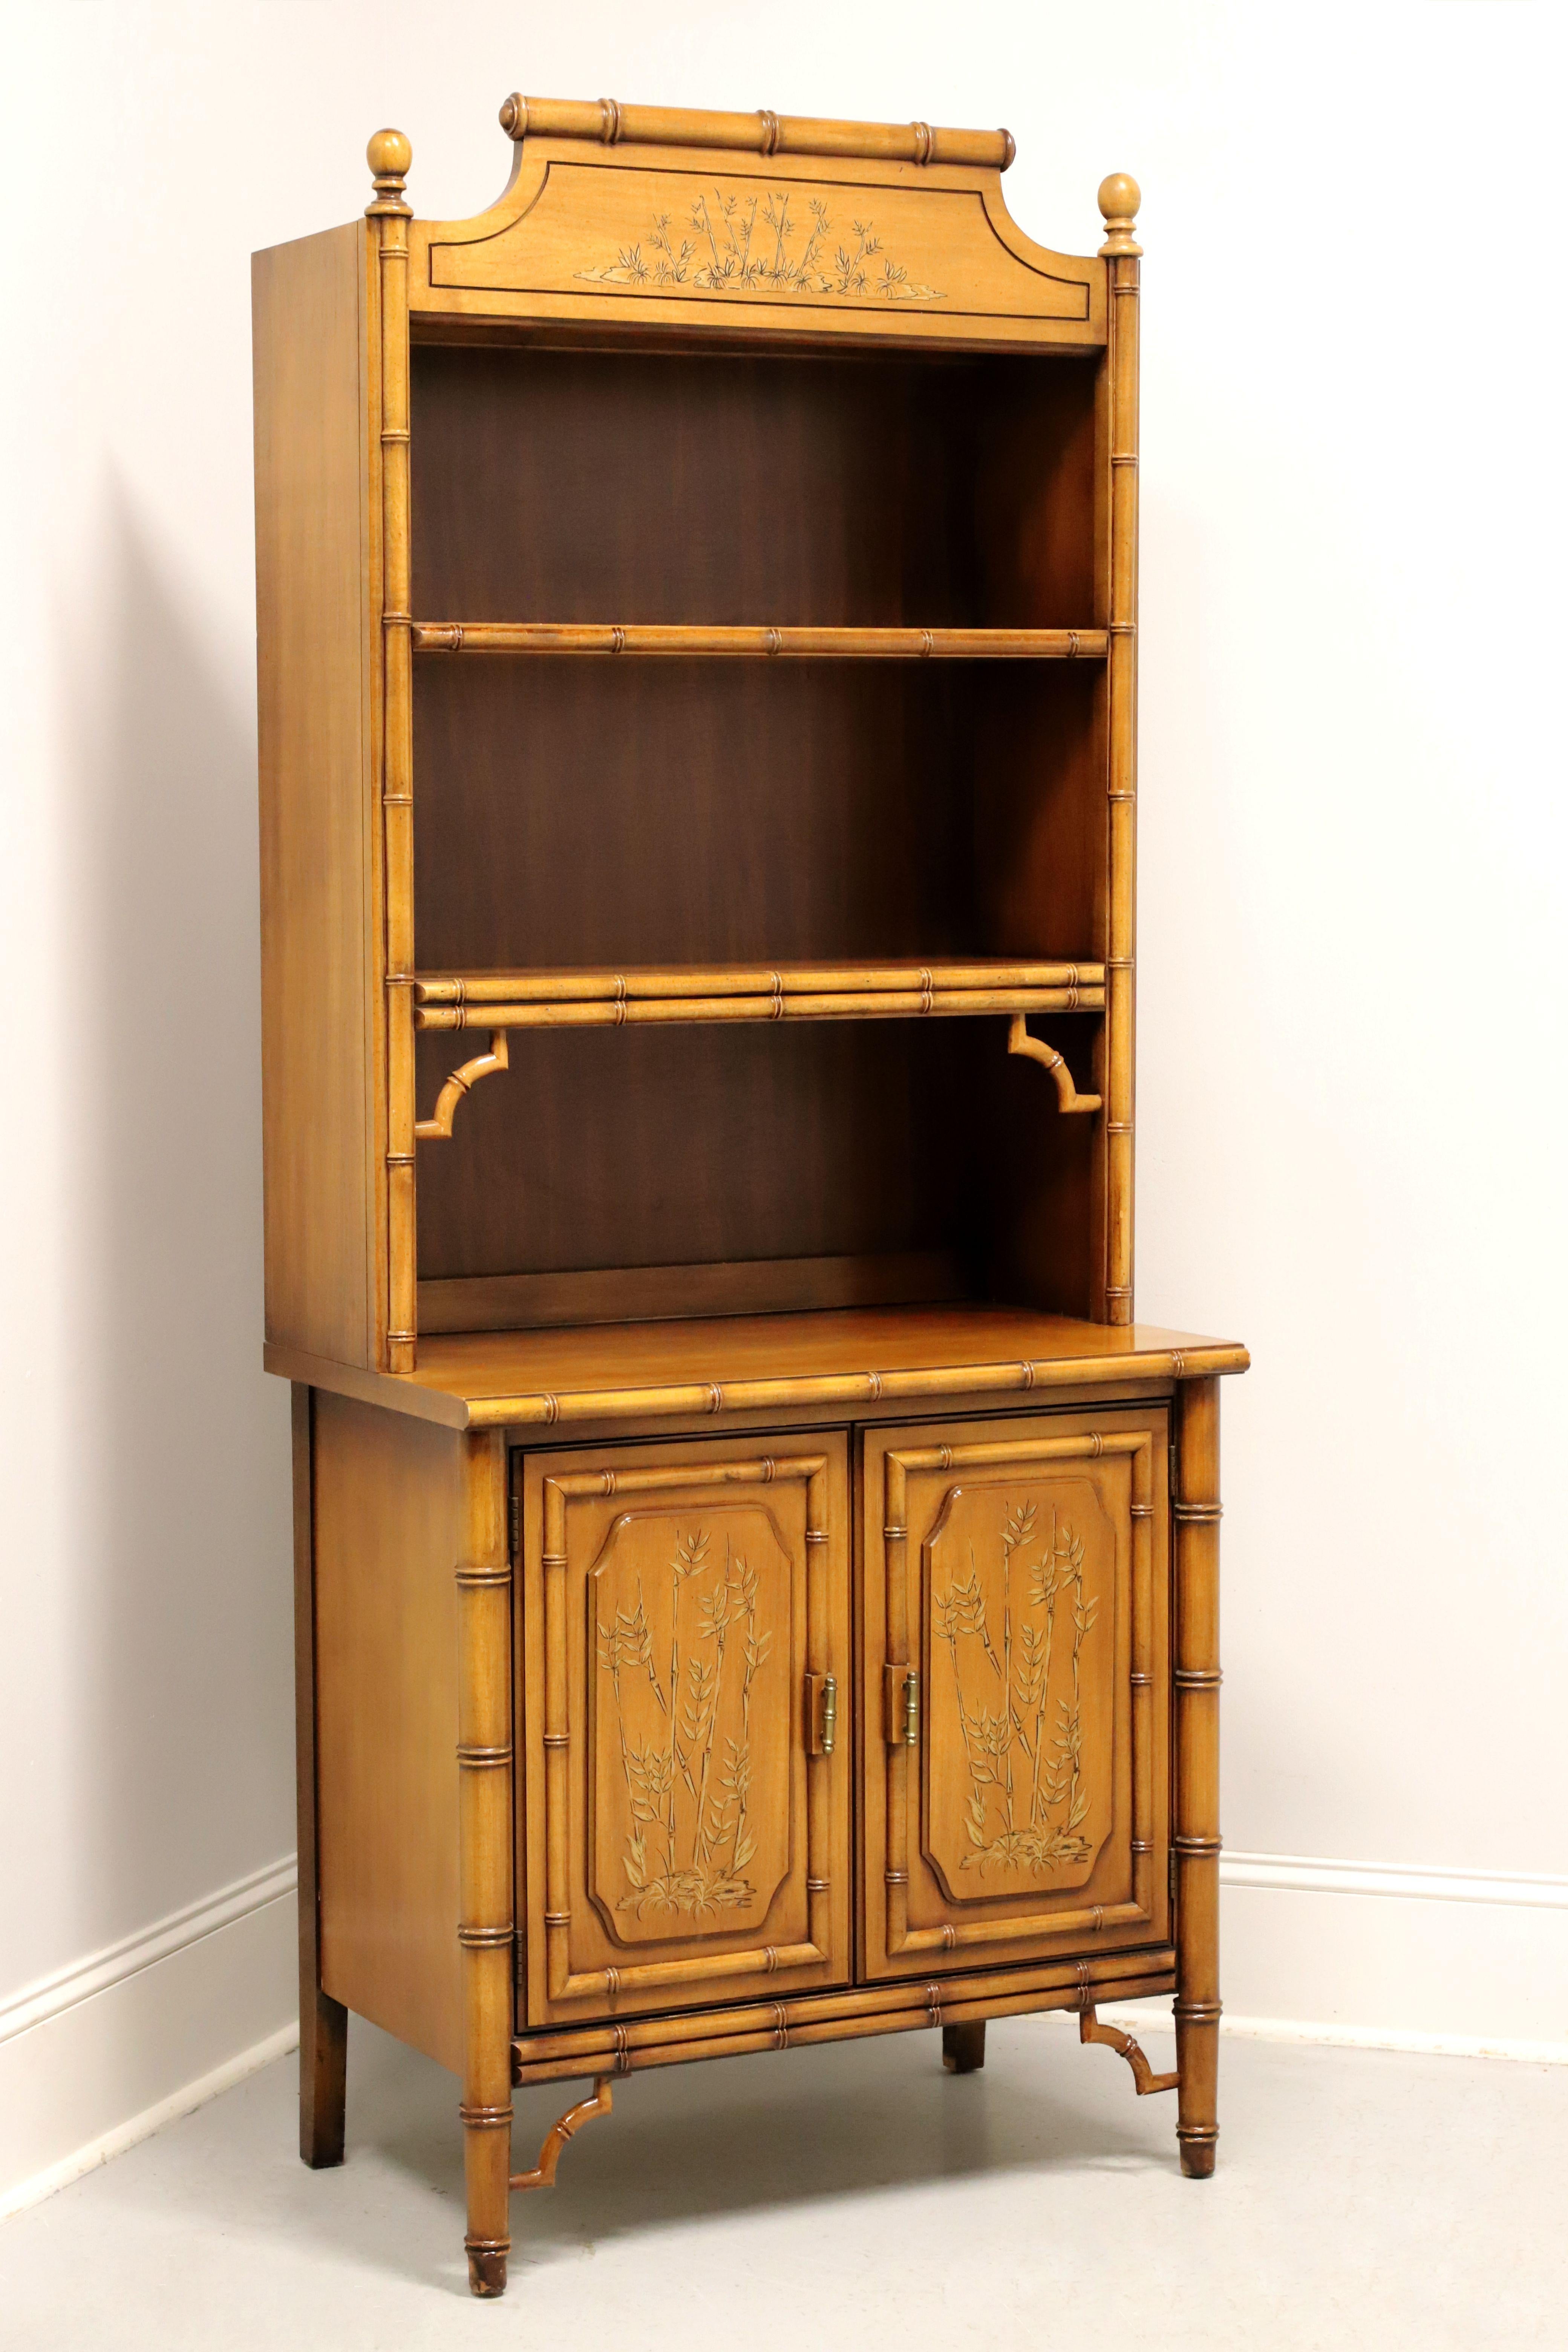 DIXIE Aloha Faux Bamboo Asian Chinoiserie Hand Painted Bookcase with Cabinet 6